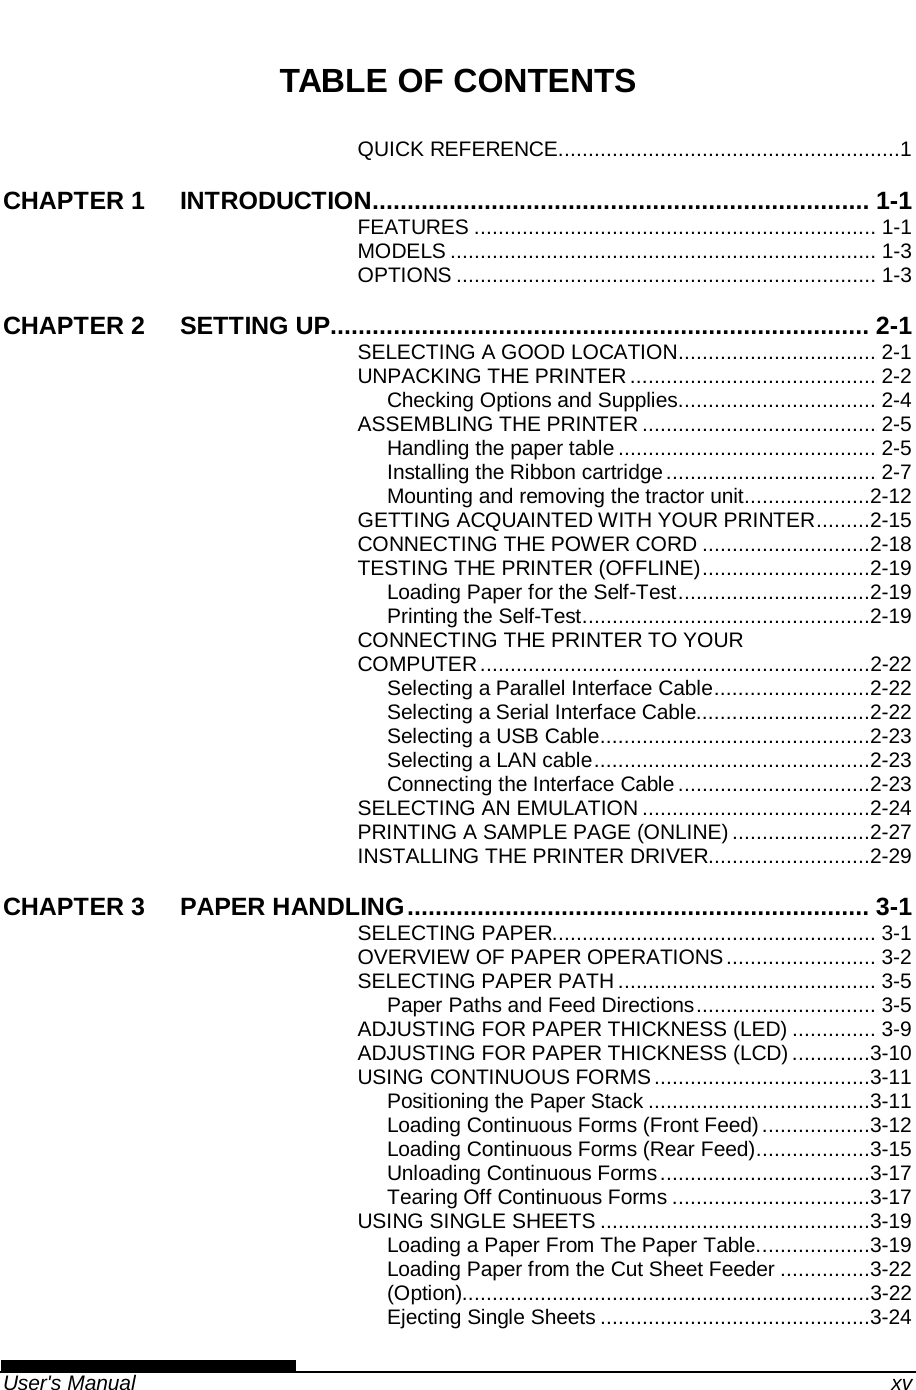   User&apos;s Manual    xv TABLE OF CONTENTS QUICK REFERENCE .........................................................1 CHAPTER 1 INTRODUCTION ....................................................................... 1-1 FEATURES ................................................................... 1-1 MODELS ....................................................................... 1-3 OPTIONS ...................................................................... 1-3 CHAPTER 2 SETTING UP............................................................................. 2-1 SELECTING A GOOD LOCATION ................................. 2-1 UNPACKING THE PRINTER ......................................... 2-2 Checking Options and Supplies ................................. 2-4 ASSEMBLING THE PRINTER ....................................... 2-5 Handling the paper table ........................................... 2-5 Installing the Ribbon cartridge ................................... 2-7 Mounting and removing the tractor unit .....................2-12 GETTING ACQUAINTED WITH YOUR PRINTER .........2-15 CONNECTING THE POWER CORD ............................2-18 TESTING THE PRINTER (OFFLINE) ............................2-19 Loading Paper for the Self-Test ................................2-19 Printing the Self-Test ................................................2-19 CONNECTING THE PRINTER TO YOUR COMPUTER .................................................................2-22 Selecting a Parallel Interface Cable ..........................2-22 Selecting a Serial Interface Cable.............................2-22 Selecting a USB Cable .............................................2-23 Selecting a LAN cable ..............................................2-23 Connecting the Interface Cable ................................2-23 SELECTING AN EMULATION ......................................2-24 PRINTING A SAMPLE PAGE (ONLINE) .......................2-27 INSTALLING THE PRINTER DRIVER...........................2-29 CHAPTER 3 PAPER HANDLING .................................................................. 3-1 SELECTING PAPER...................................................... 3-1 OVERVIEW OF PAPER OPERATIONS ......................... 3-2 SELECTING PAPER PATH ........................................... 3-5 Paper Paths and Feed Directions .............................. 3-5 ADJUSTING FOR PAPER THICKNESS (LED) .............. 3-9 ADJUSTING FOR PAPER THICKNESS (LCD) .............3-10 USING CONTINUOUS FORMS ....................................3-11 Positioning the Paper Stack .....................................3-11 Loading Continuous Forms (Front Feed) ..................3-12 Loading Continuous Forms (Rear Feed) ...................3-15 Unloading Continuous Forms ...................................3-17 Tearing Off Continuous Forms .................................3-17 USING SINGLE SHEETS .............................................3-19 Loading a Paper From The Paper Table. ..................3-19 Loading Paper from the Cut Sheet Feeder ...............3-22 (Option)....................................................................3-22 Ejecting Single Sheets .............................................3-24 